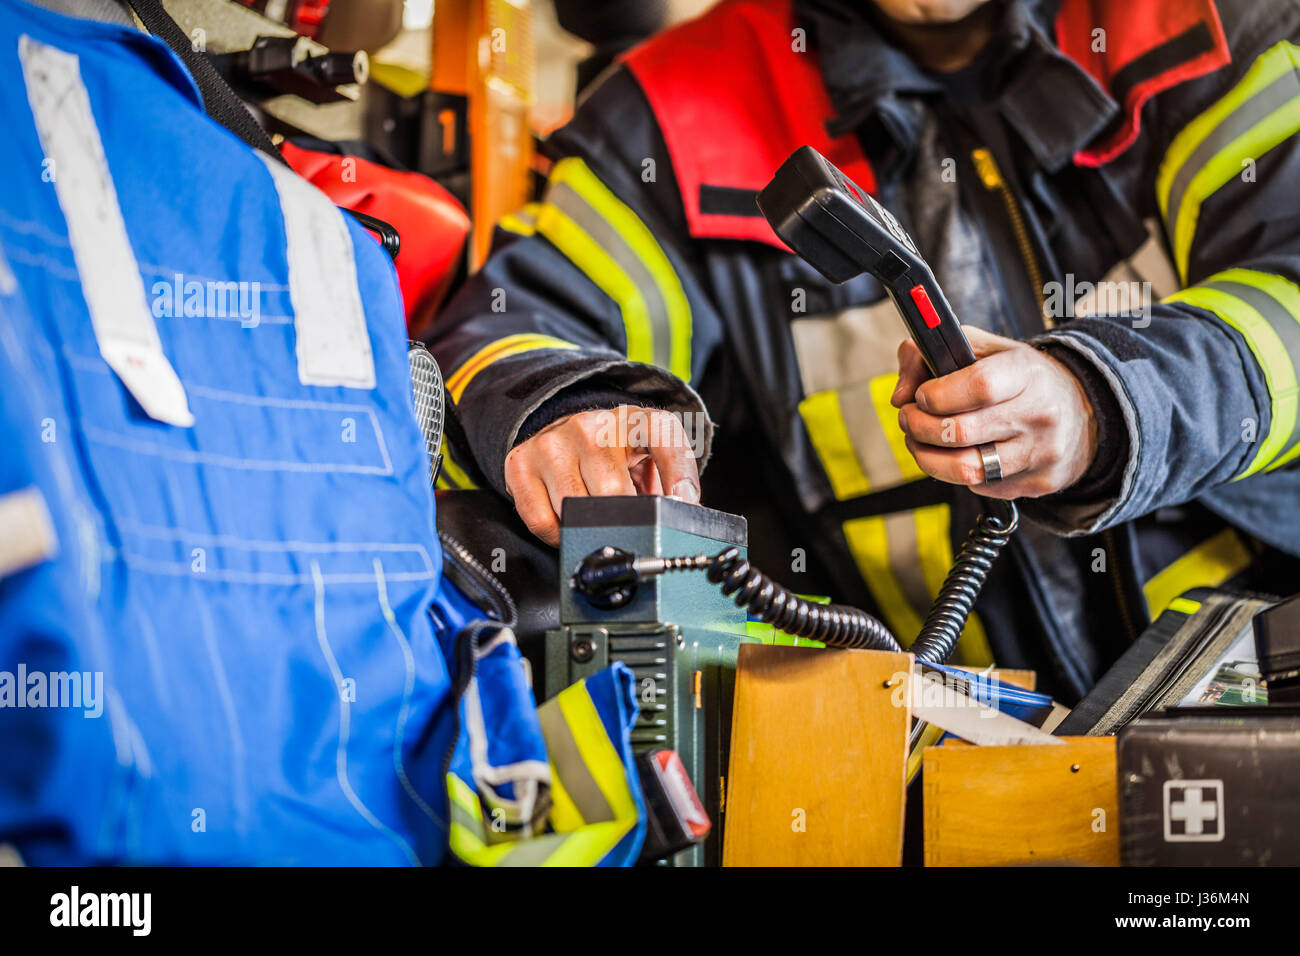 Firefighter used a radio set in a fire engine Stock Photo